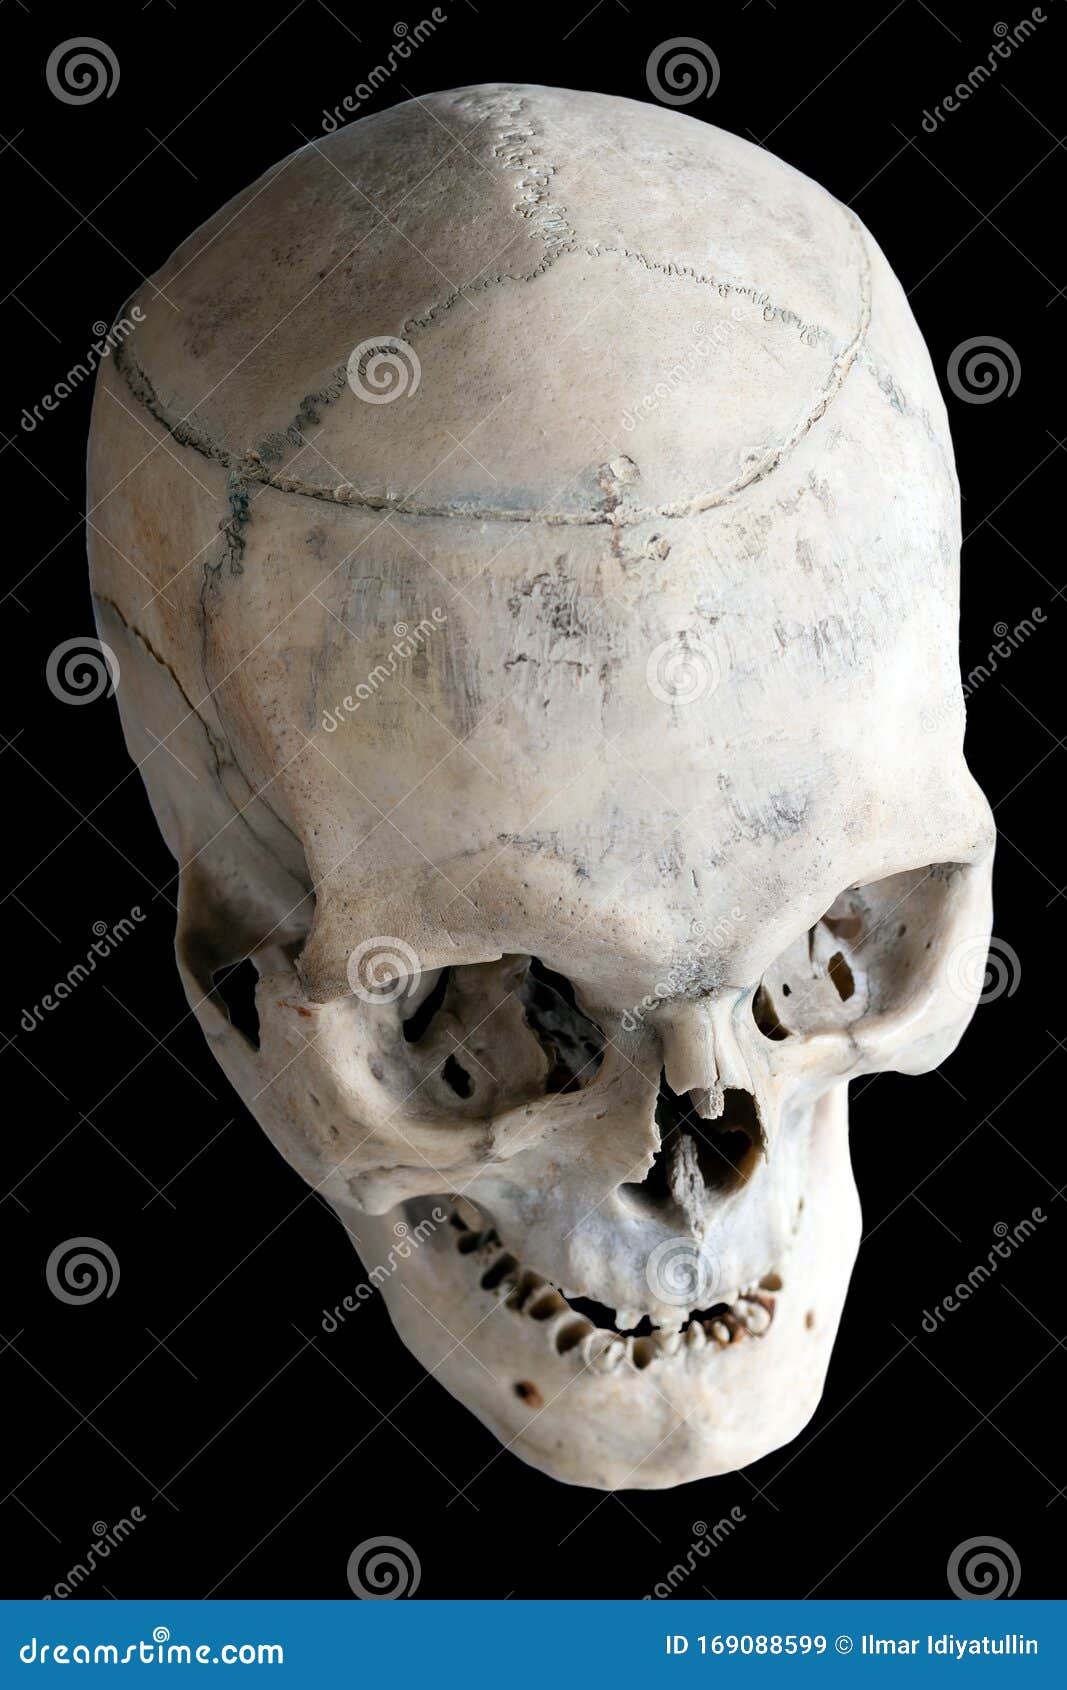 krig at føre lemmer The Human Skull. Top View, Side View. Human Anatomy. Isolated on a Black  Background Stock Image - Image of halloween, mystery: 169088599